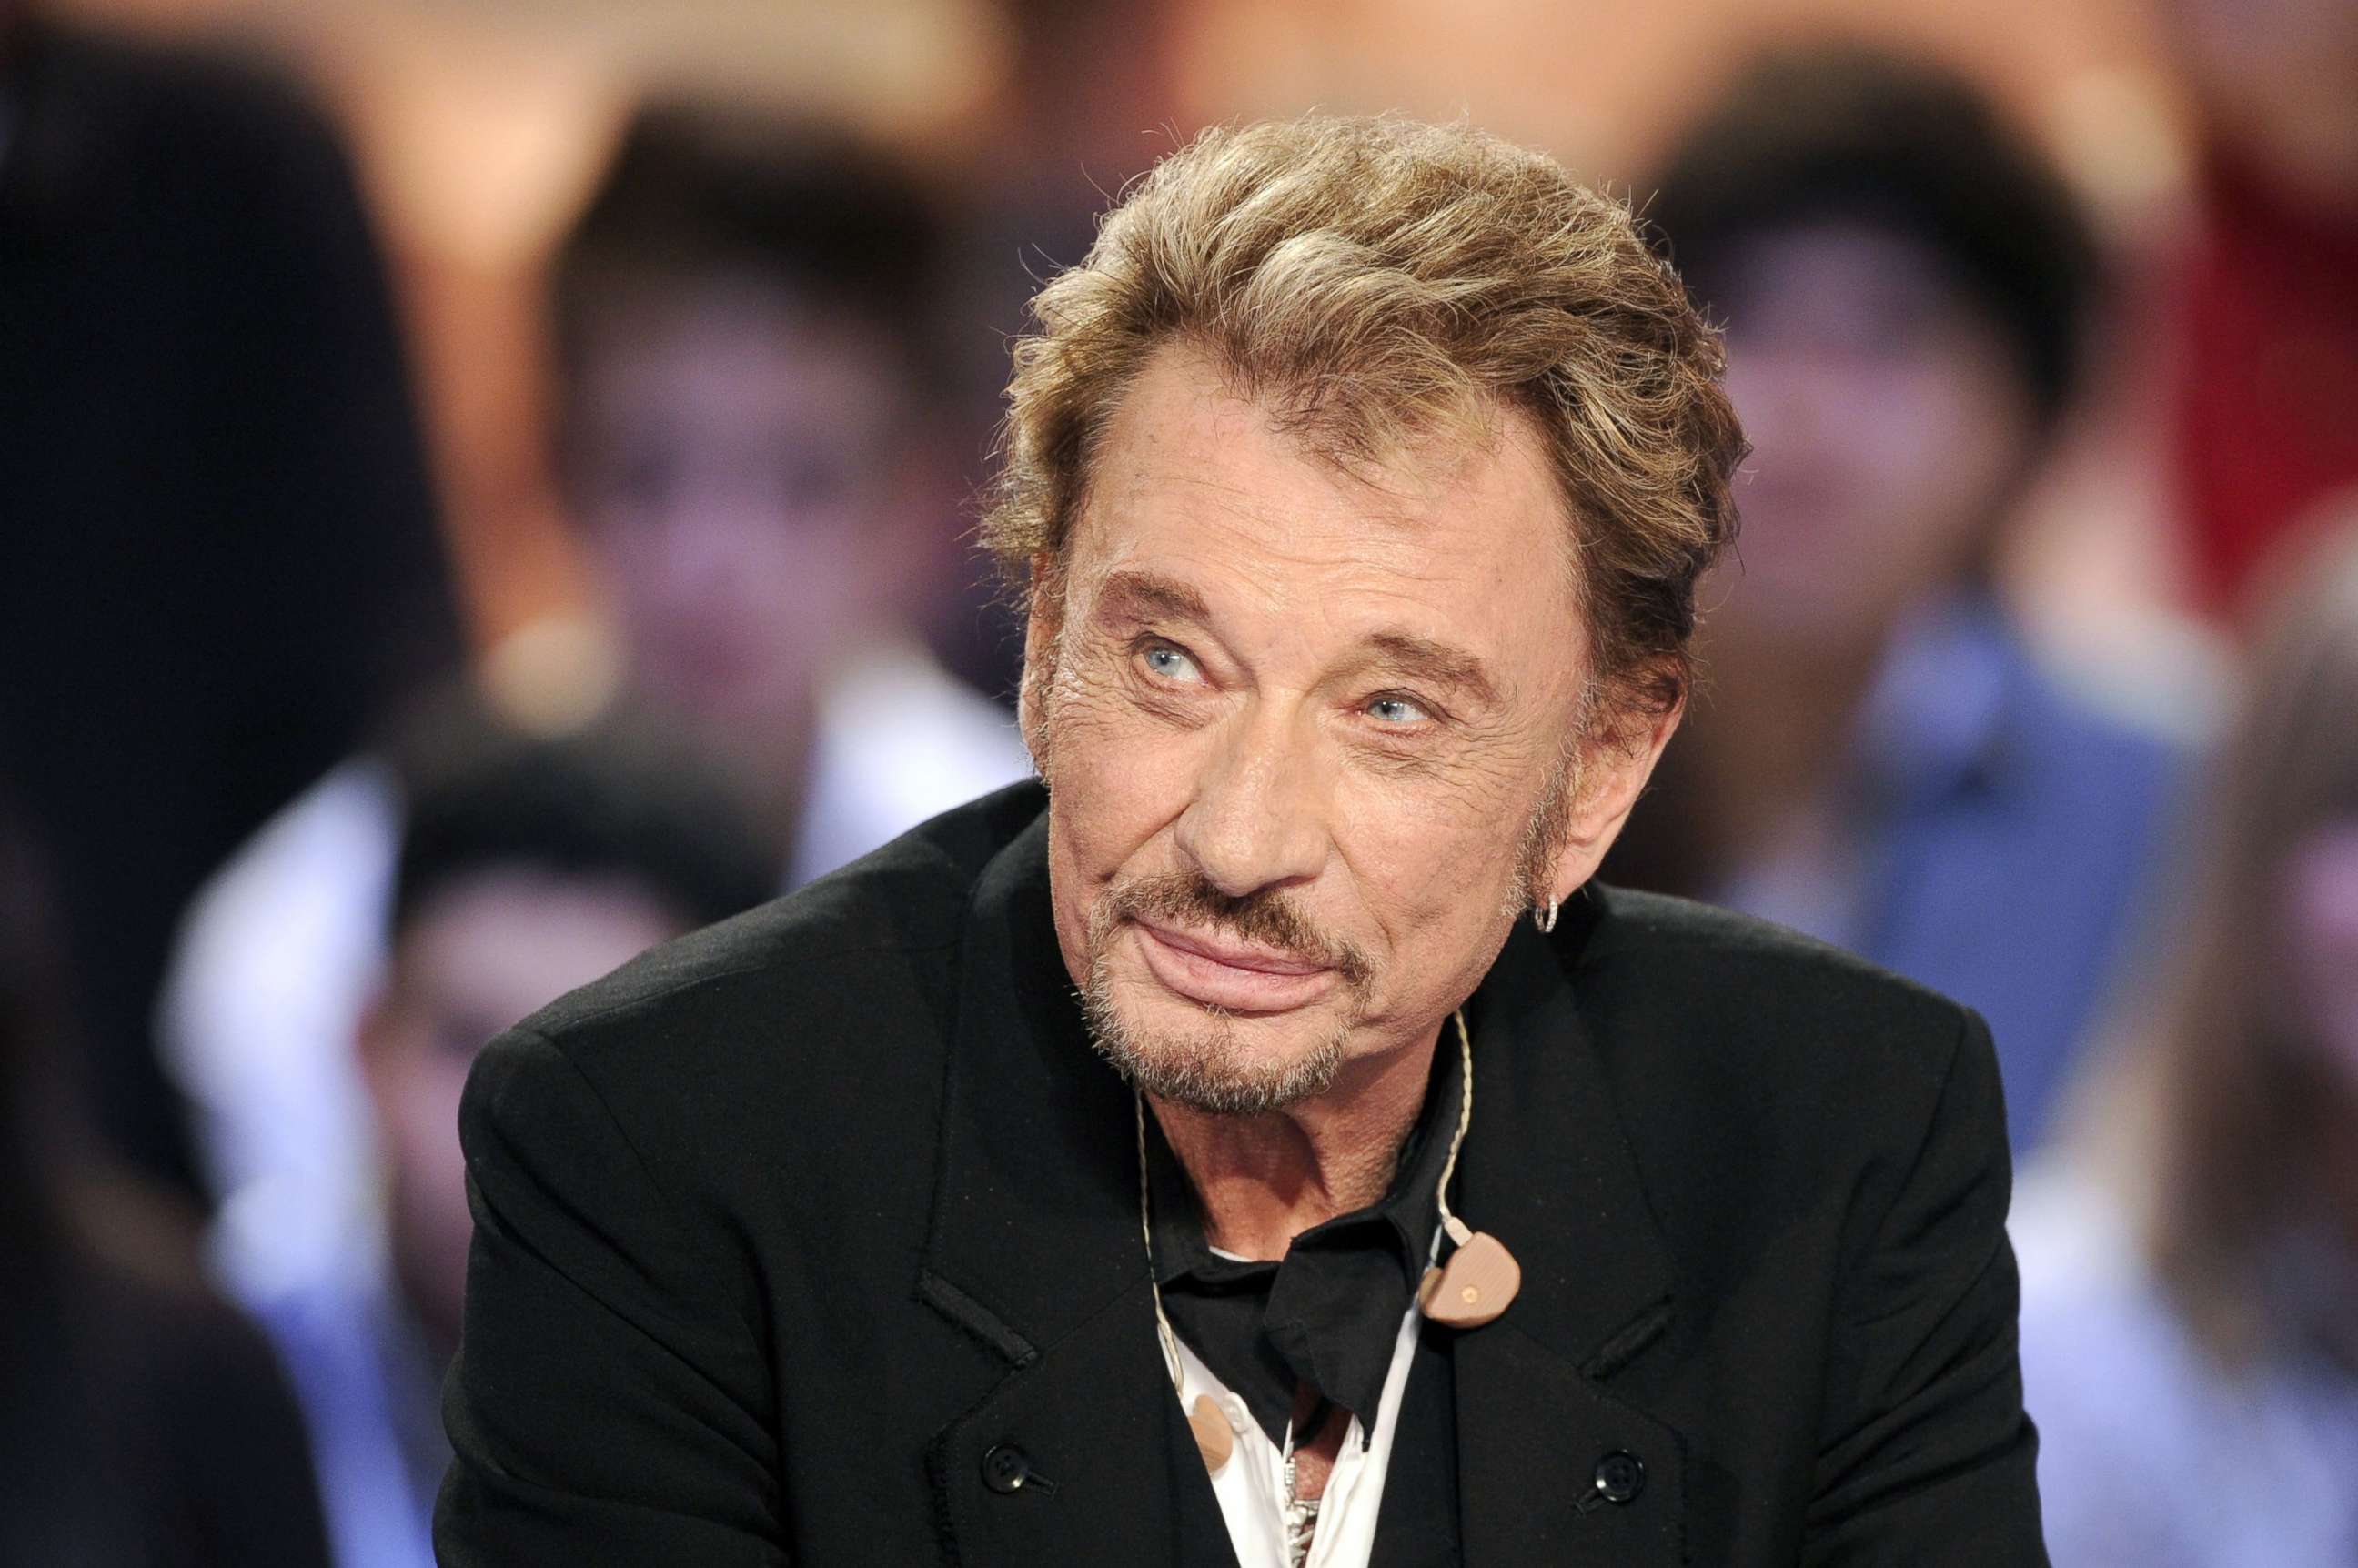 PHOTO: Johnny Hallyday attends the TV broadcast show "Le Grand Journal" on Canal + TV channel in Paris, March 28, 2011.
